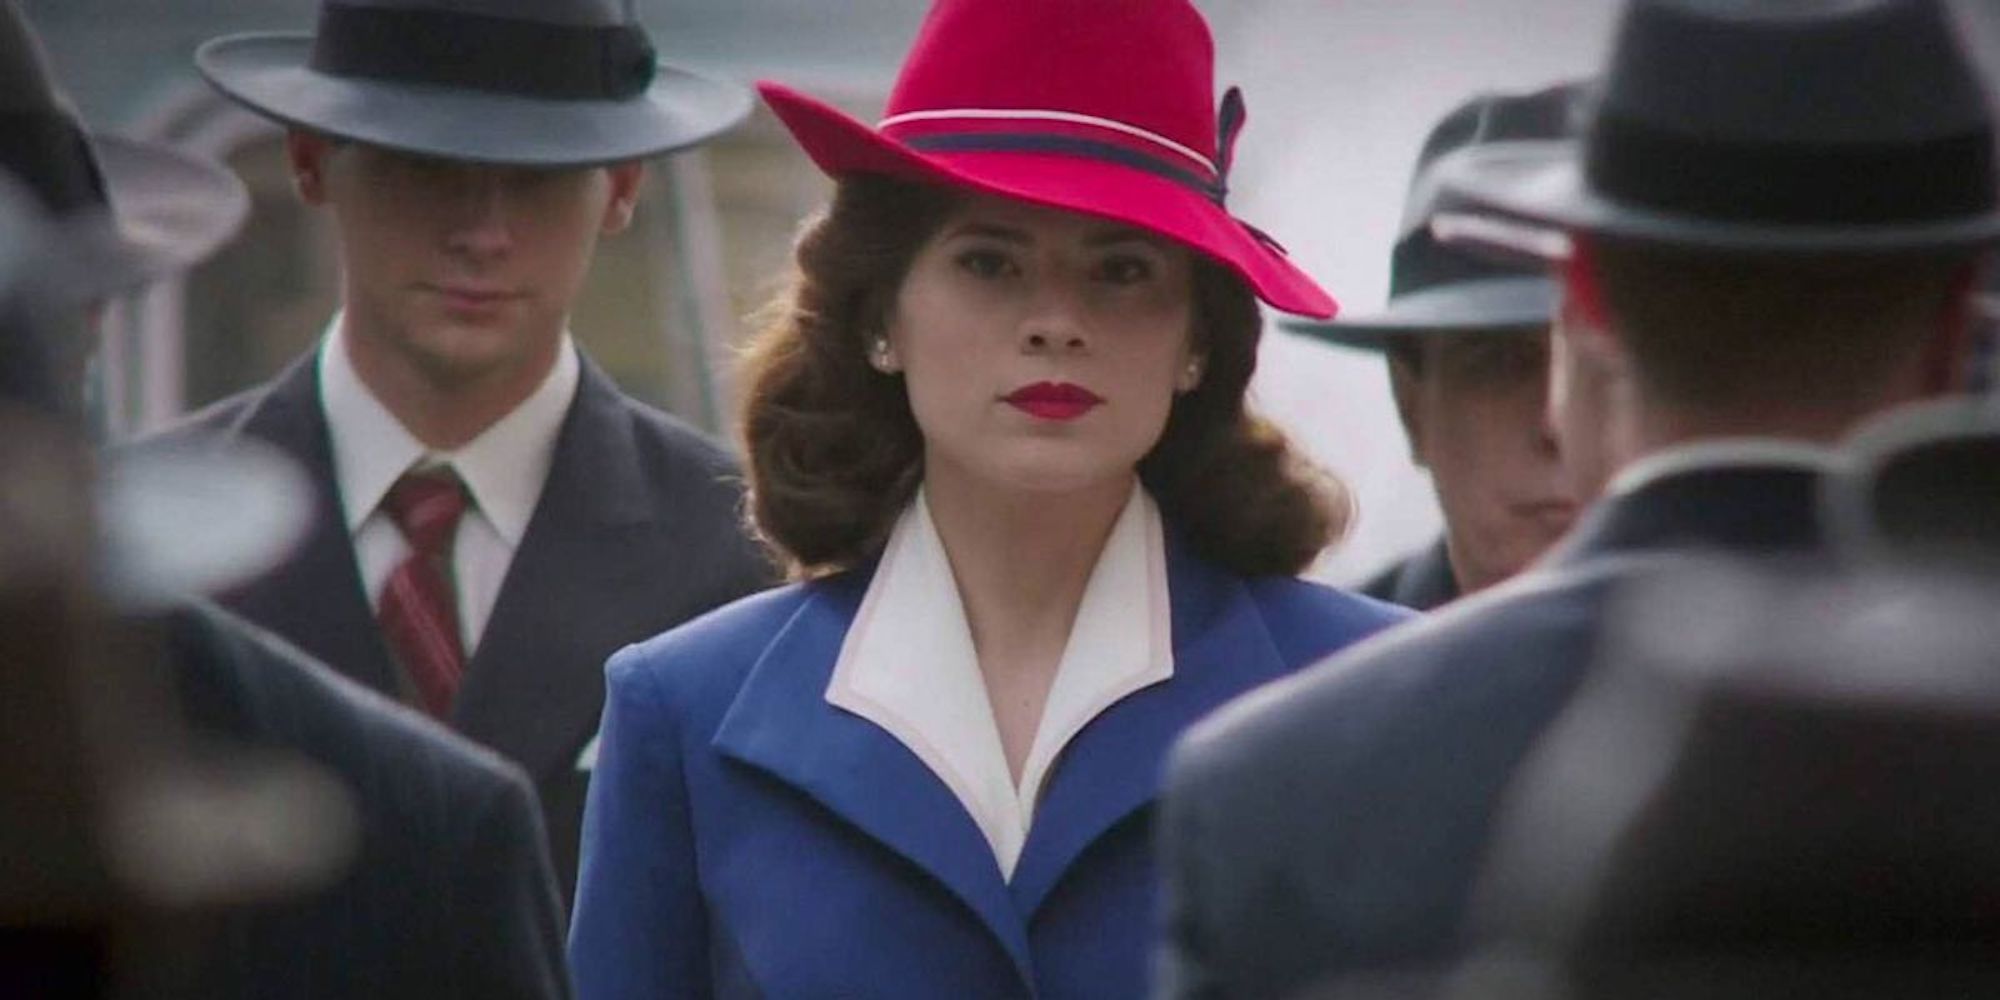 Hayley Atwell as Peggy Carter in the crowd in Agent Carter